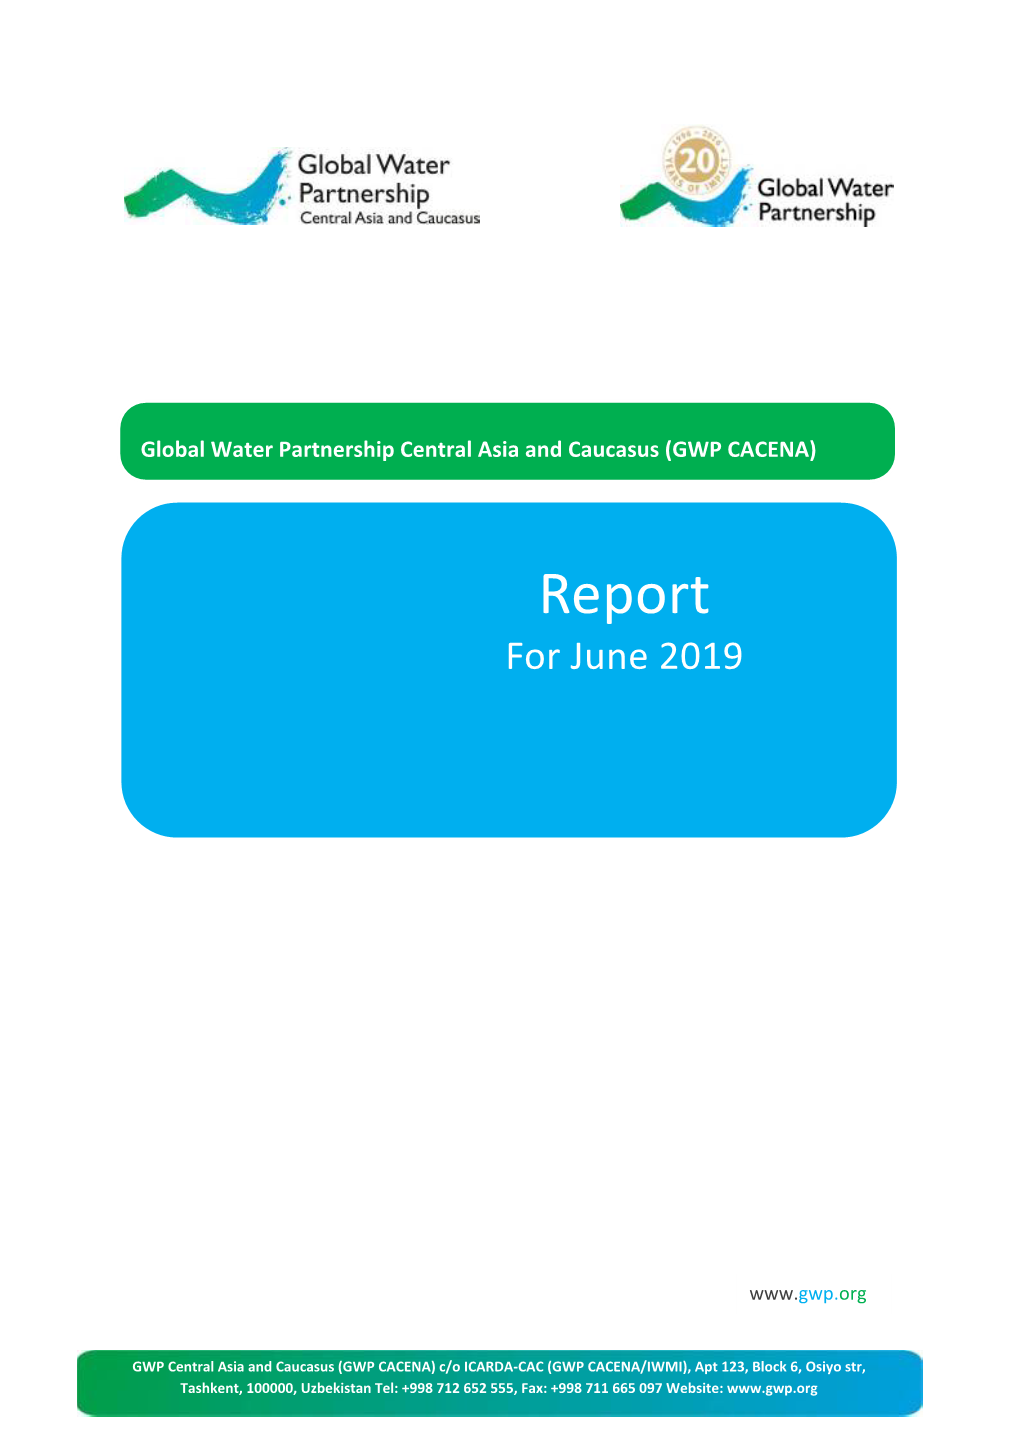 Report for June 2019